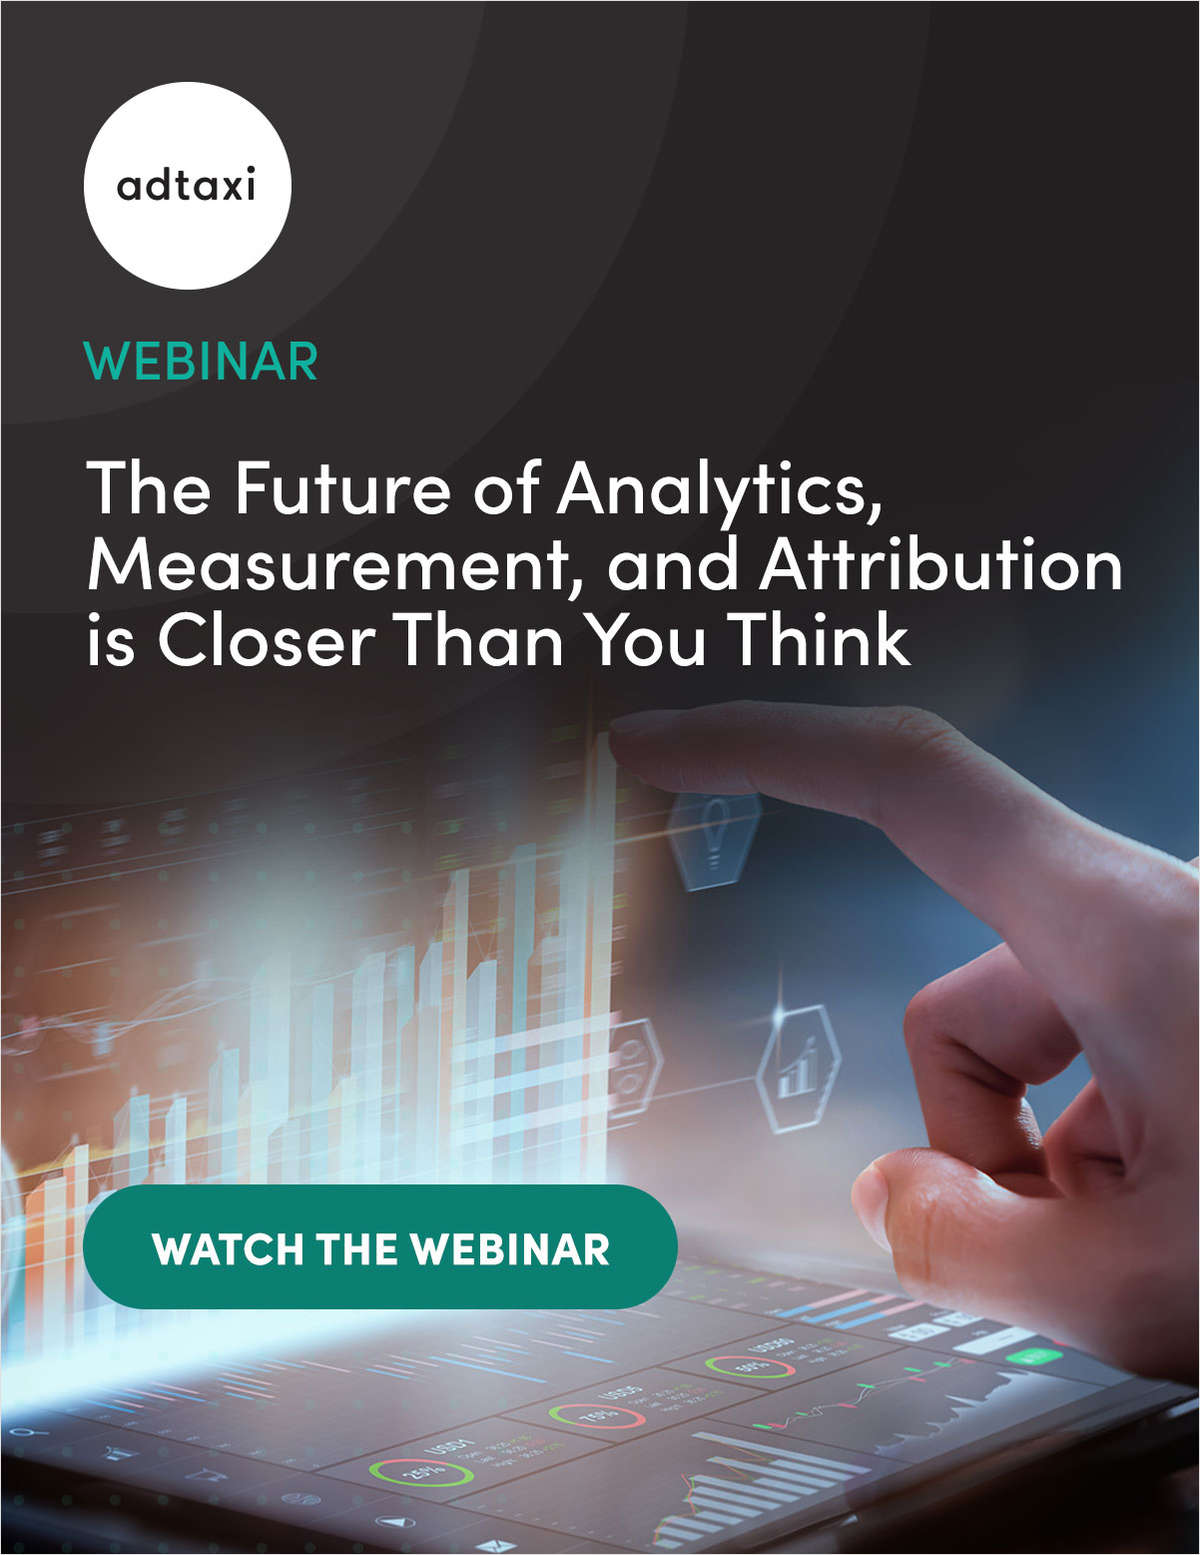 The Future of Analytics, Measurement, and Attribution is Closer Than You Think